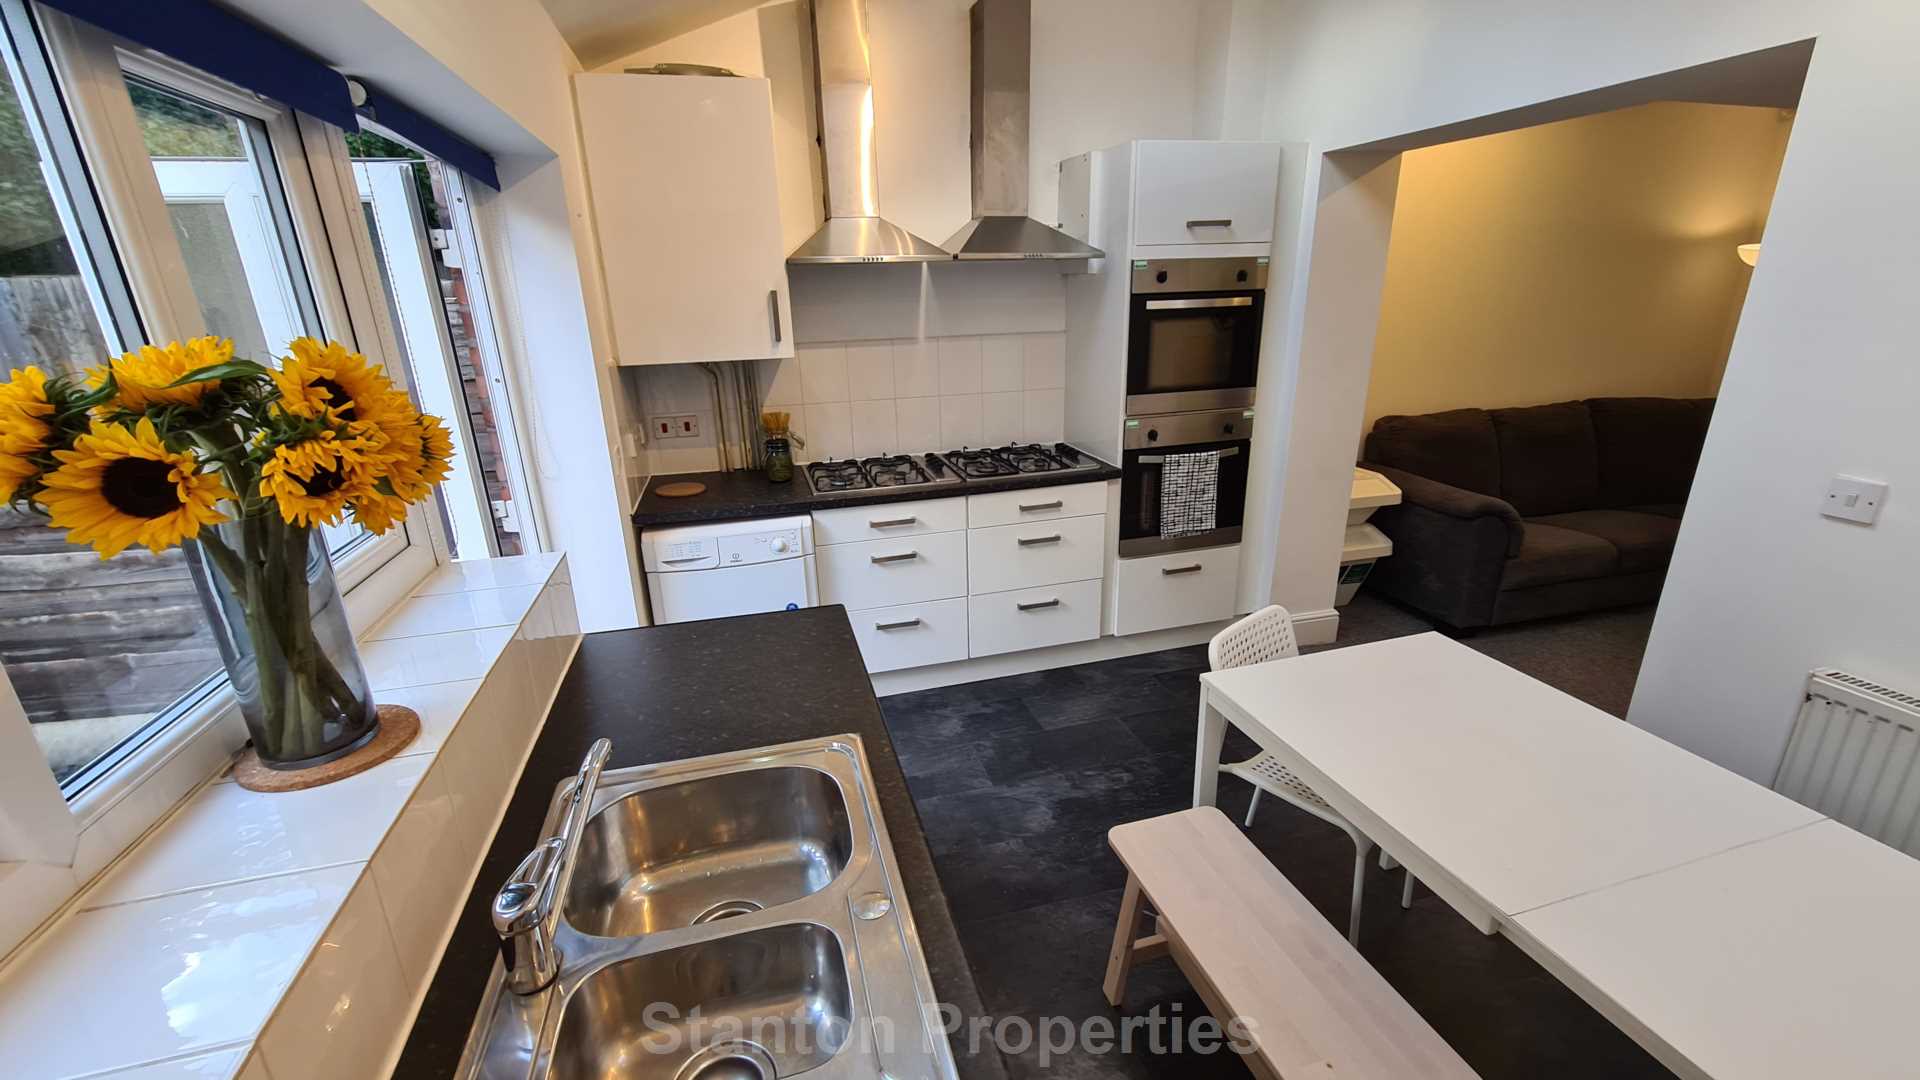 See Video Tour, £130 pppw, Albion Road, Manchester, Image 1